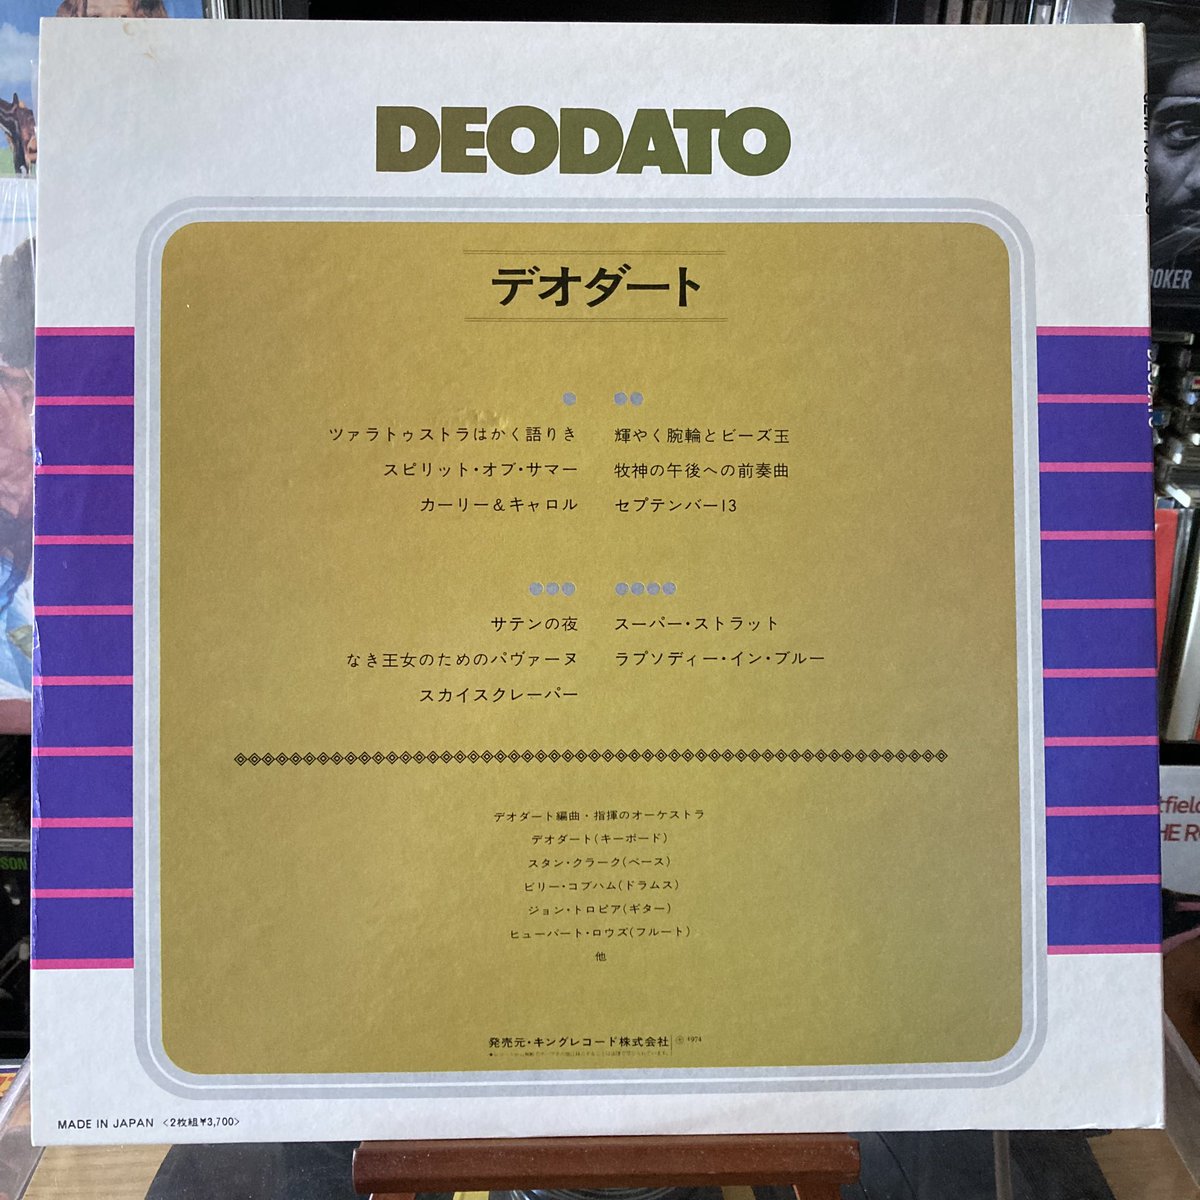 Deodato/Best
#nowplaying 
#vinyl #records #recordcollection
#cds #cdcollection
#deodato